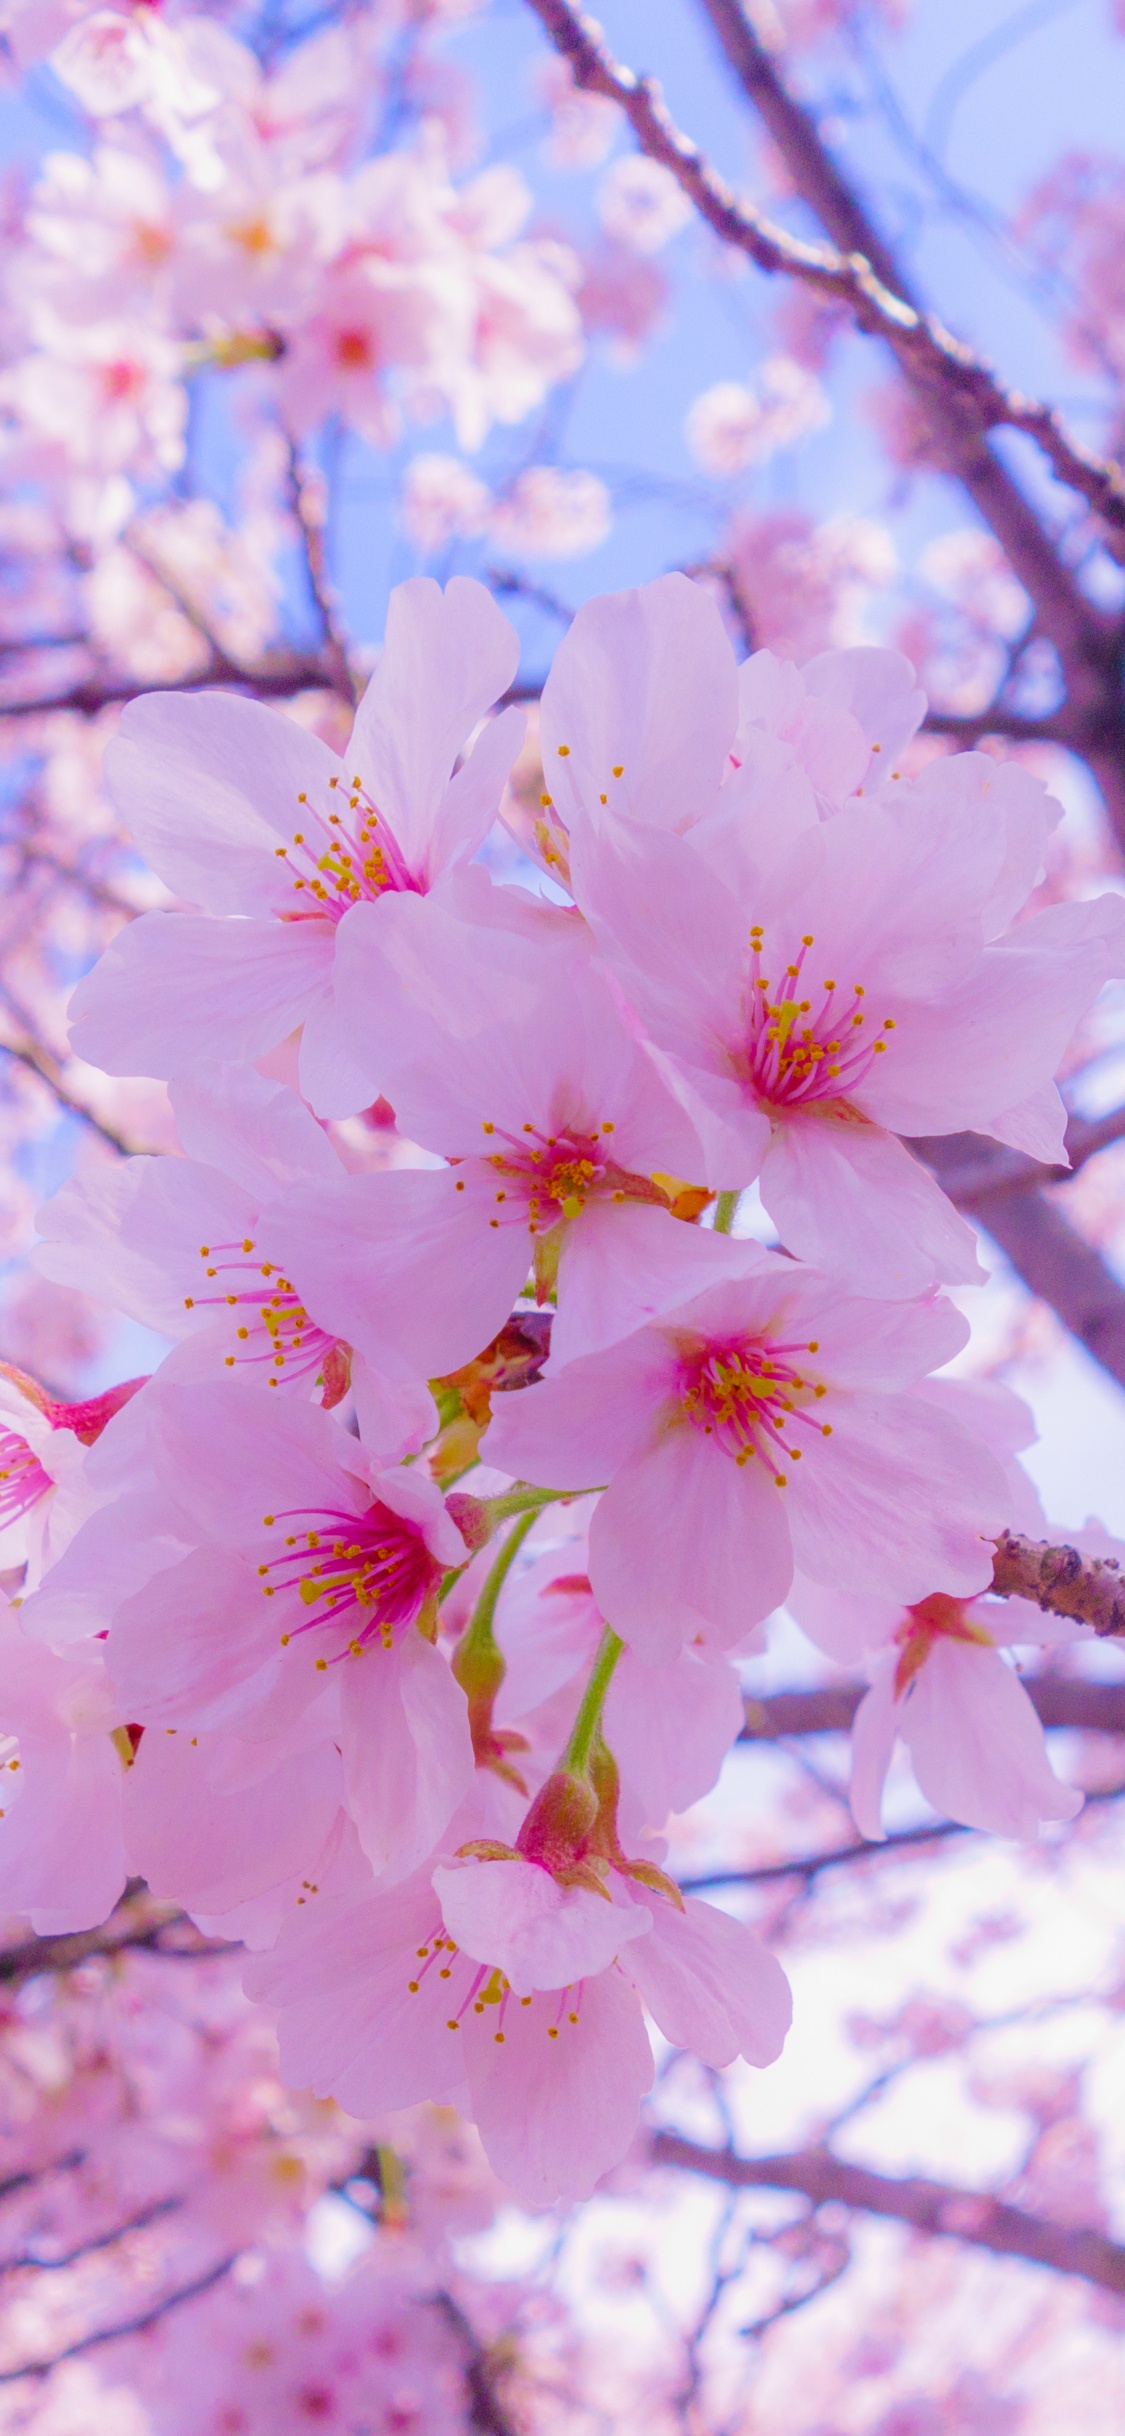 Pink Cherry Blossom Tree During Daytime. Wallpaper in 1125x2436 Resolution